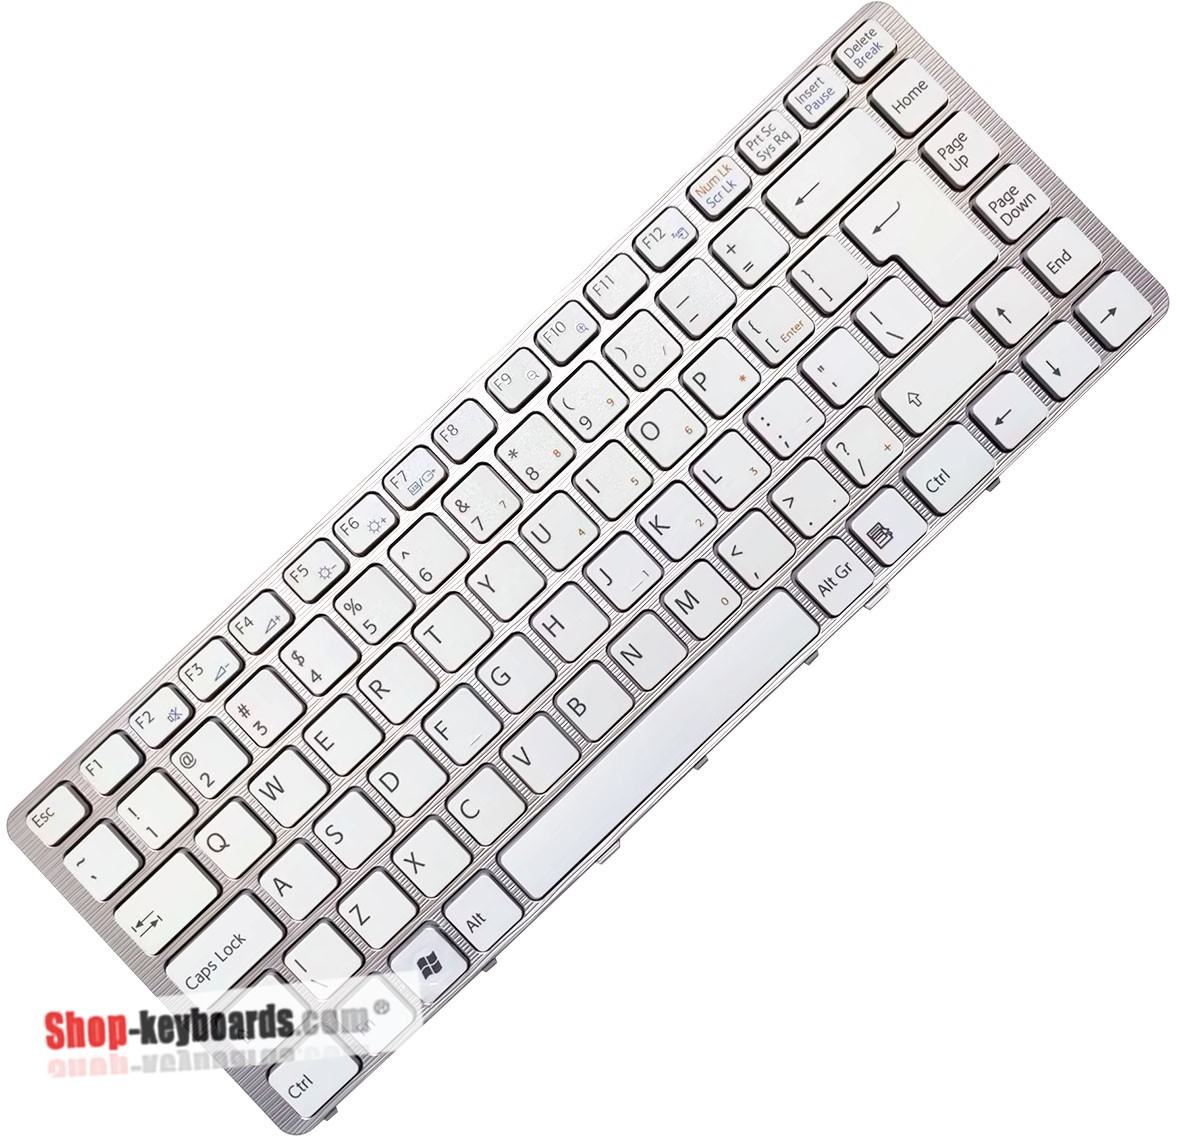 Sony VAIO VGN-NW24JG  Keyboard replacement